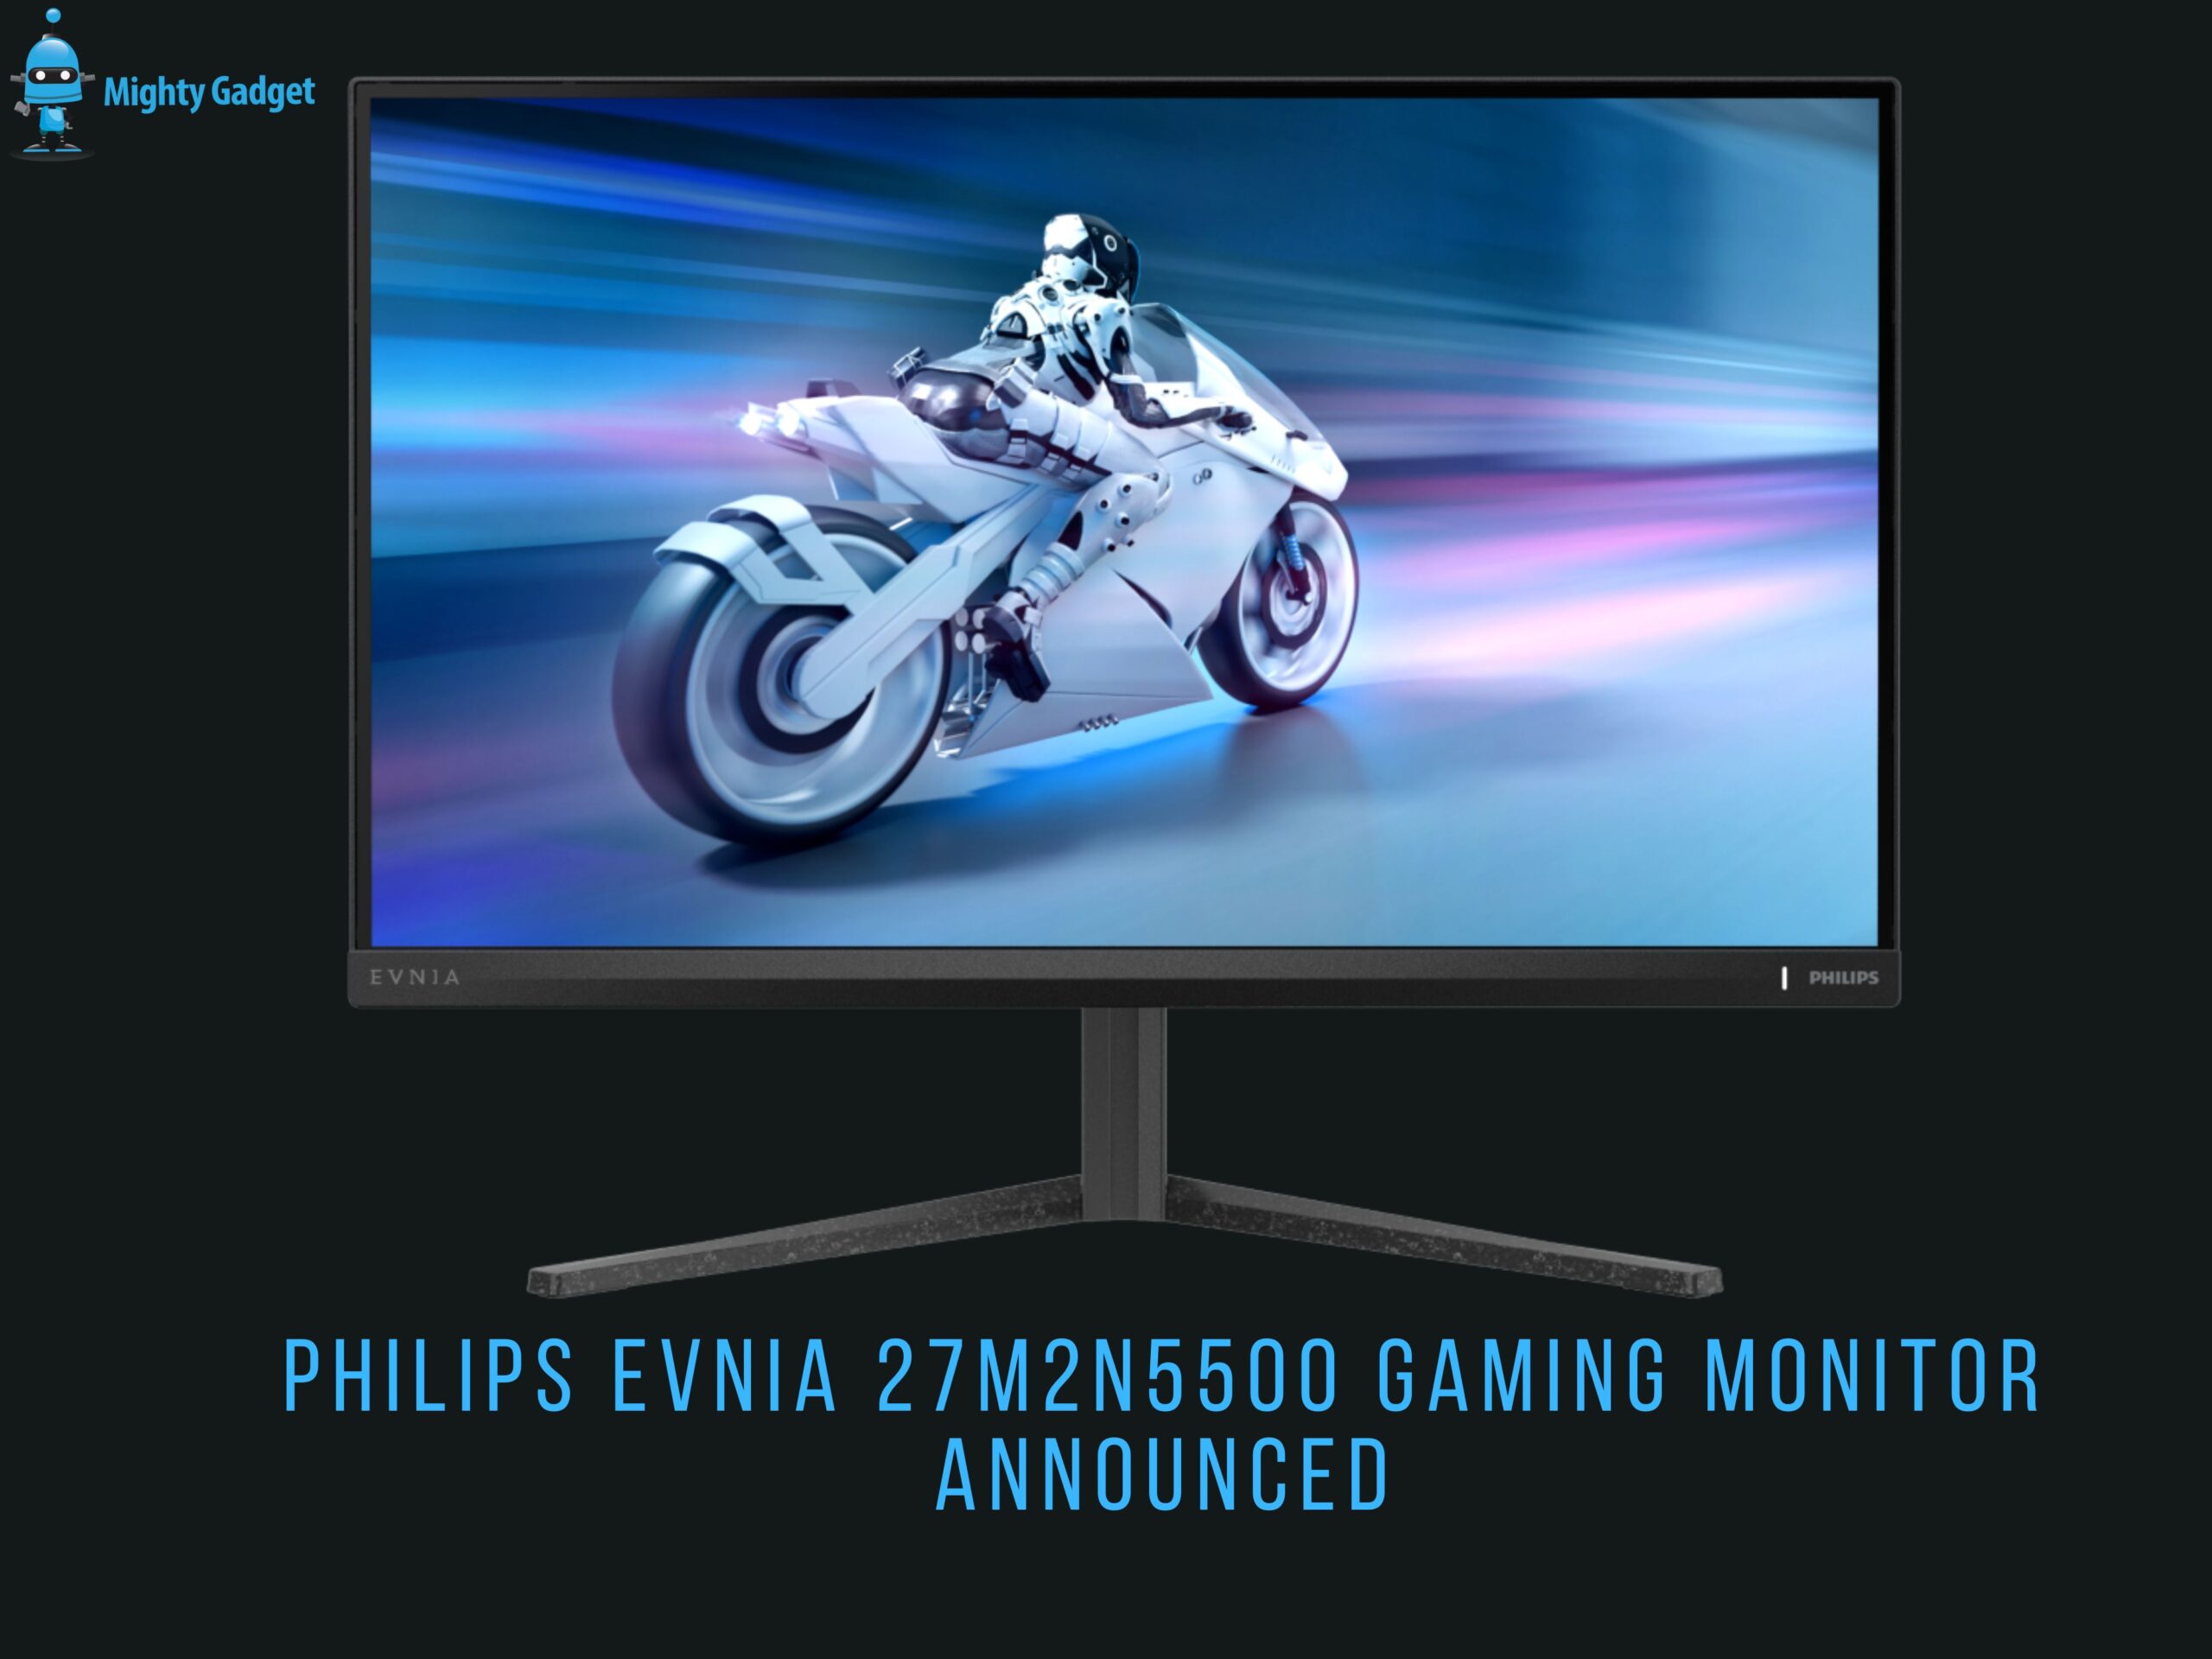 Philips Evnia 27M2N5500 Gaming Monitor Announced scaled